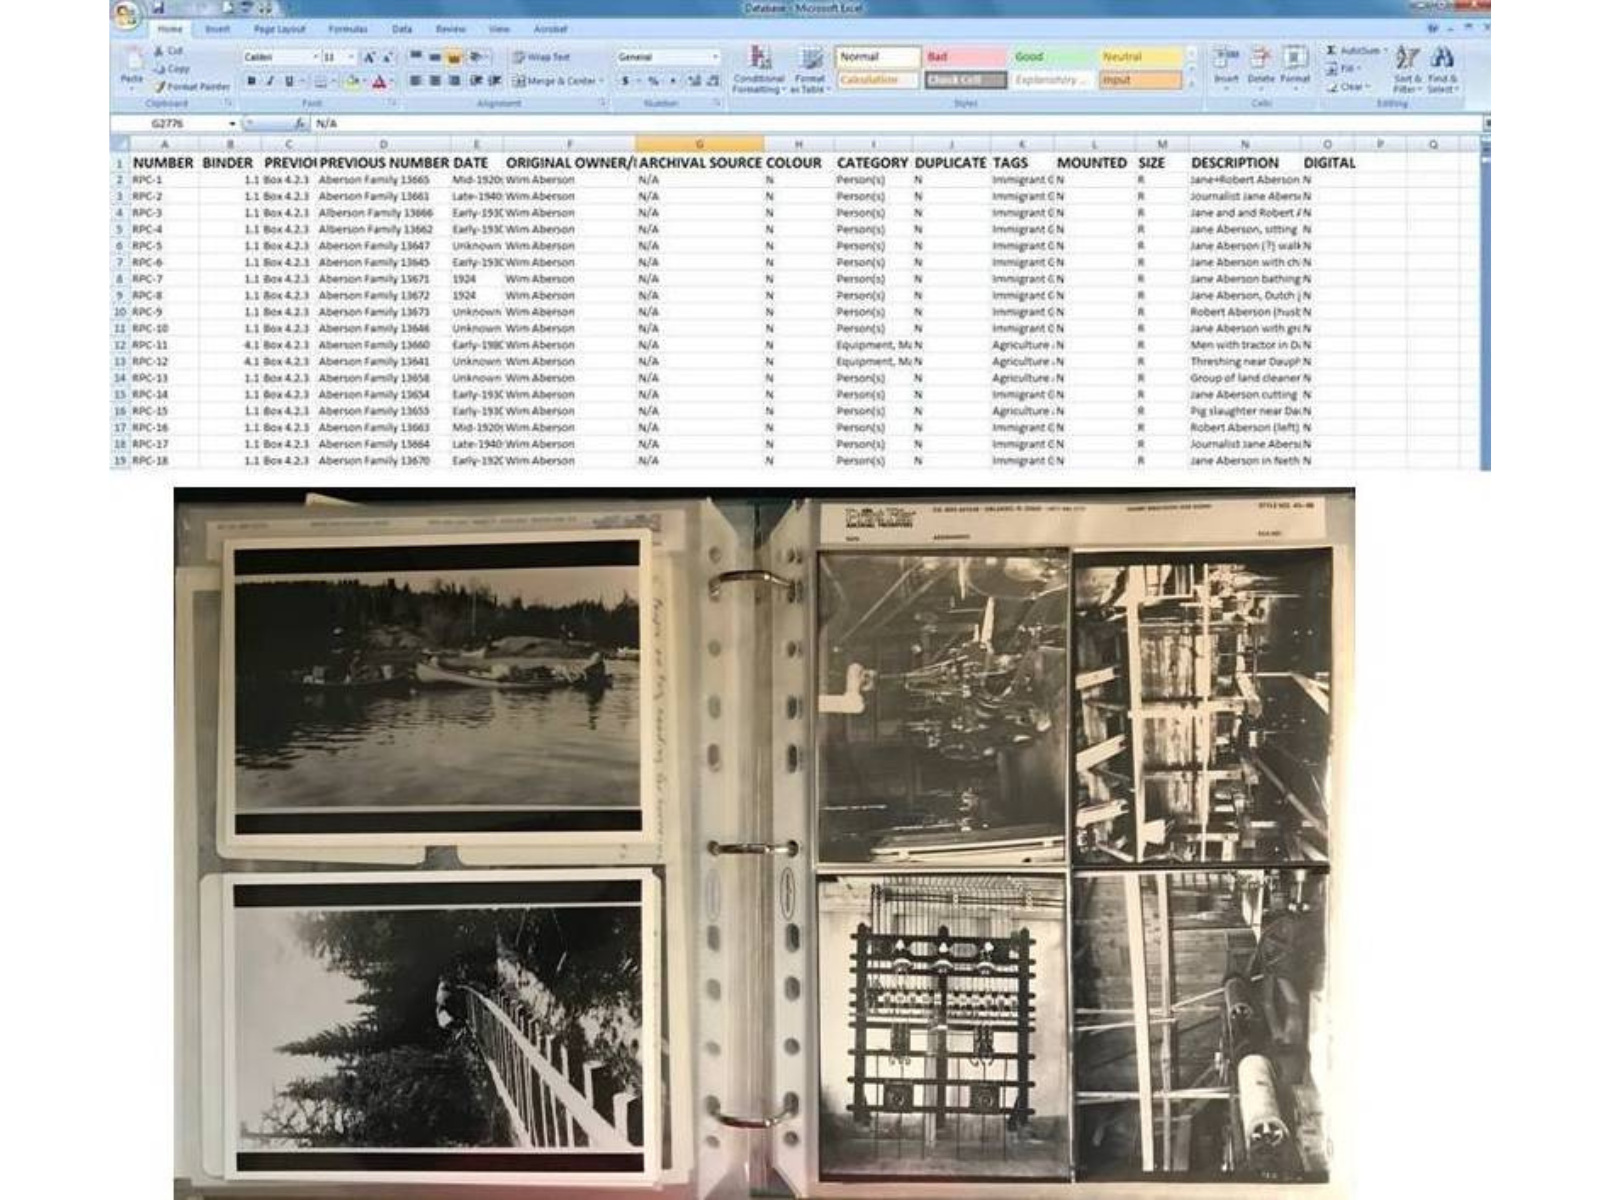 At the top, a screenshot of an Excel document breaking down artifact details. At the bottom, a photograph of an open photo album with black and white photos.